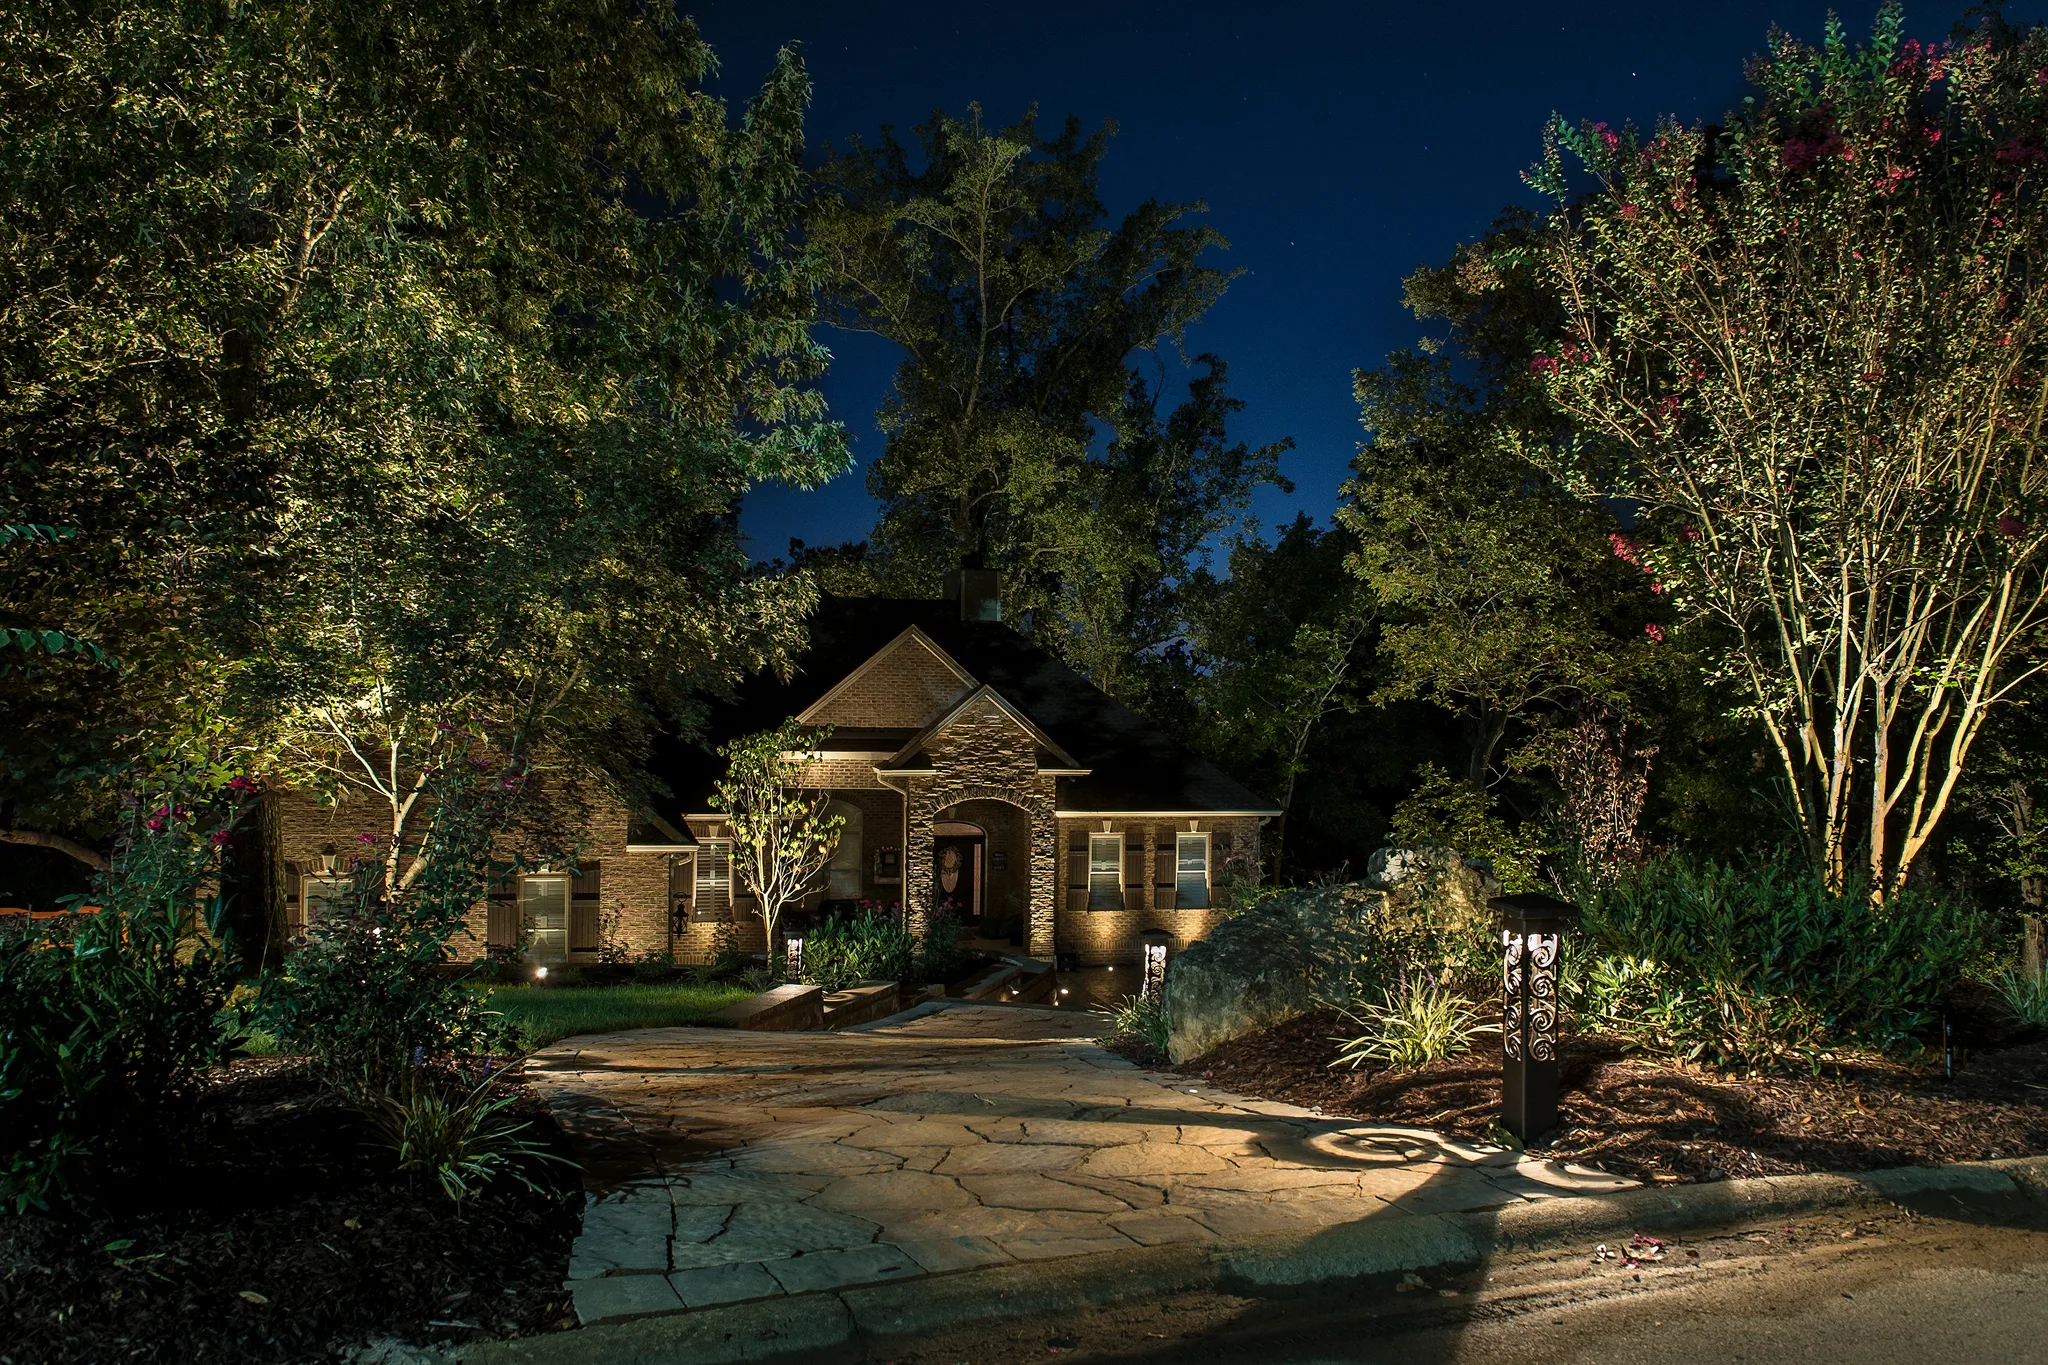 TAILORED OUTDOOR LIGHTING DESIGNS FOR YOUR OAK HILL RESIDENTIAL PROPERTY